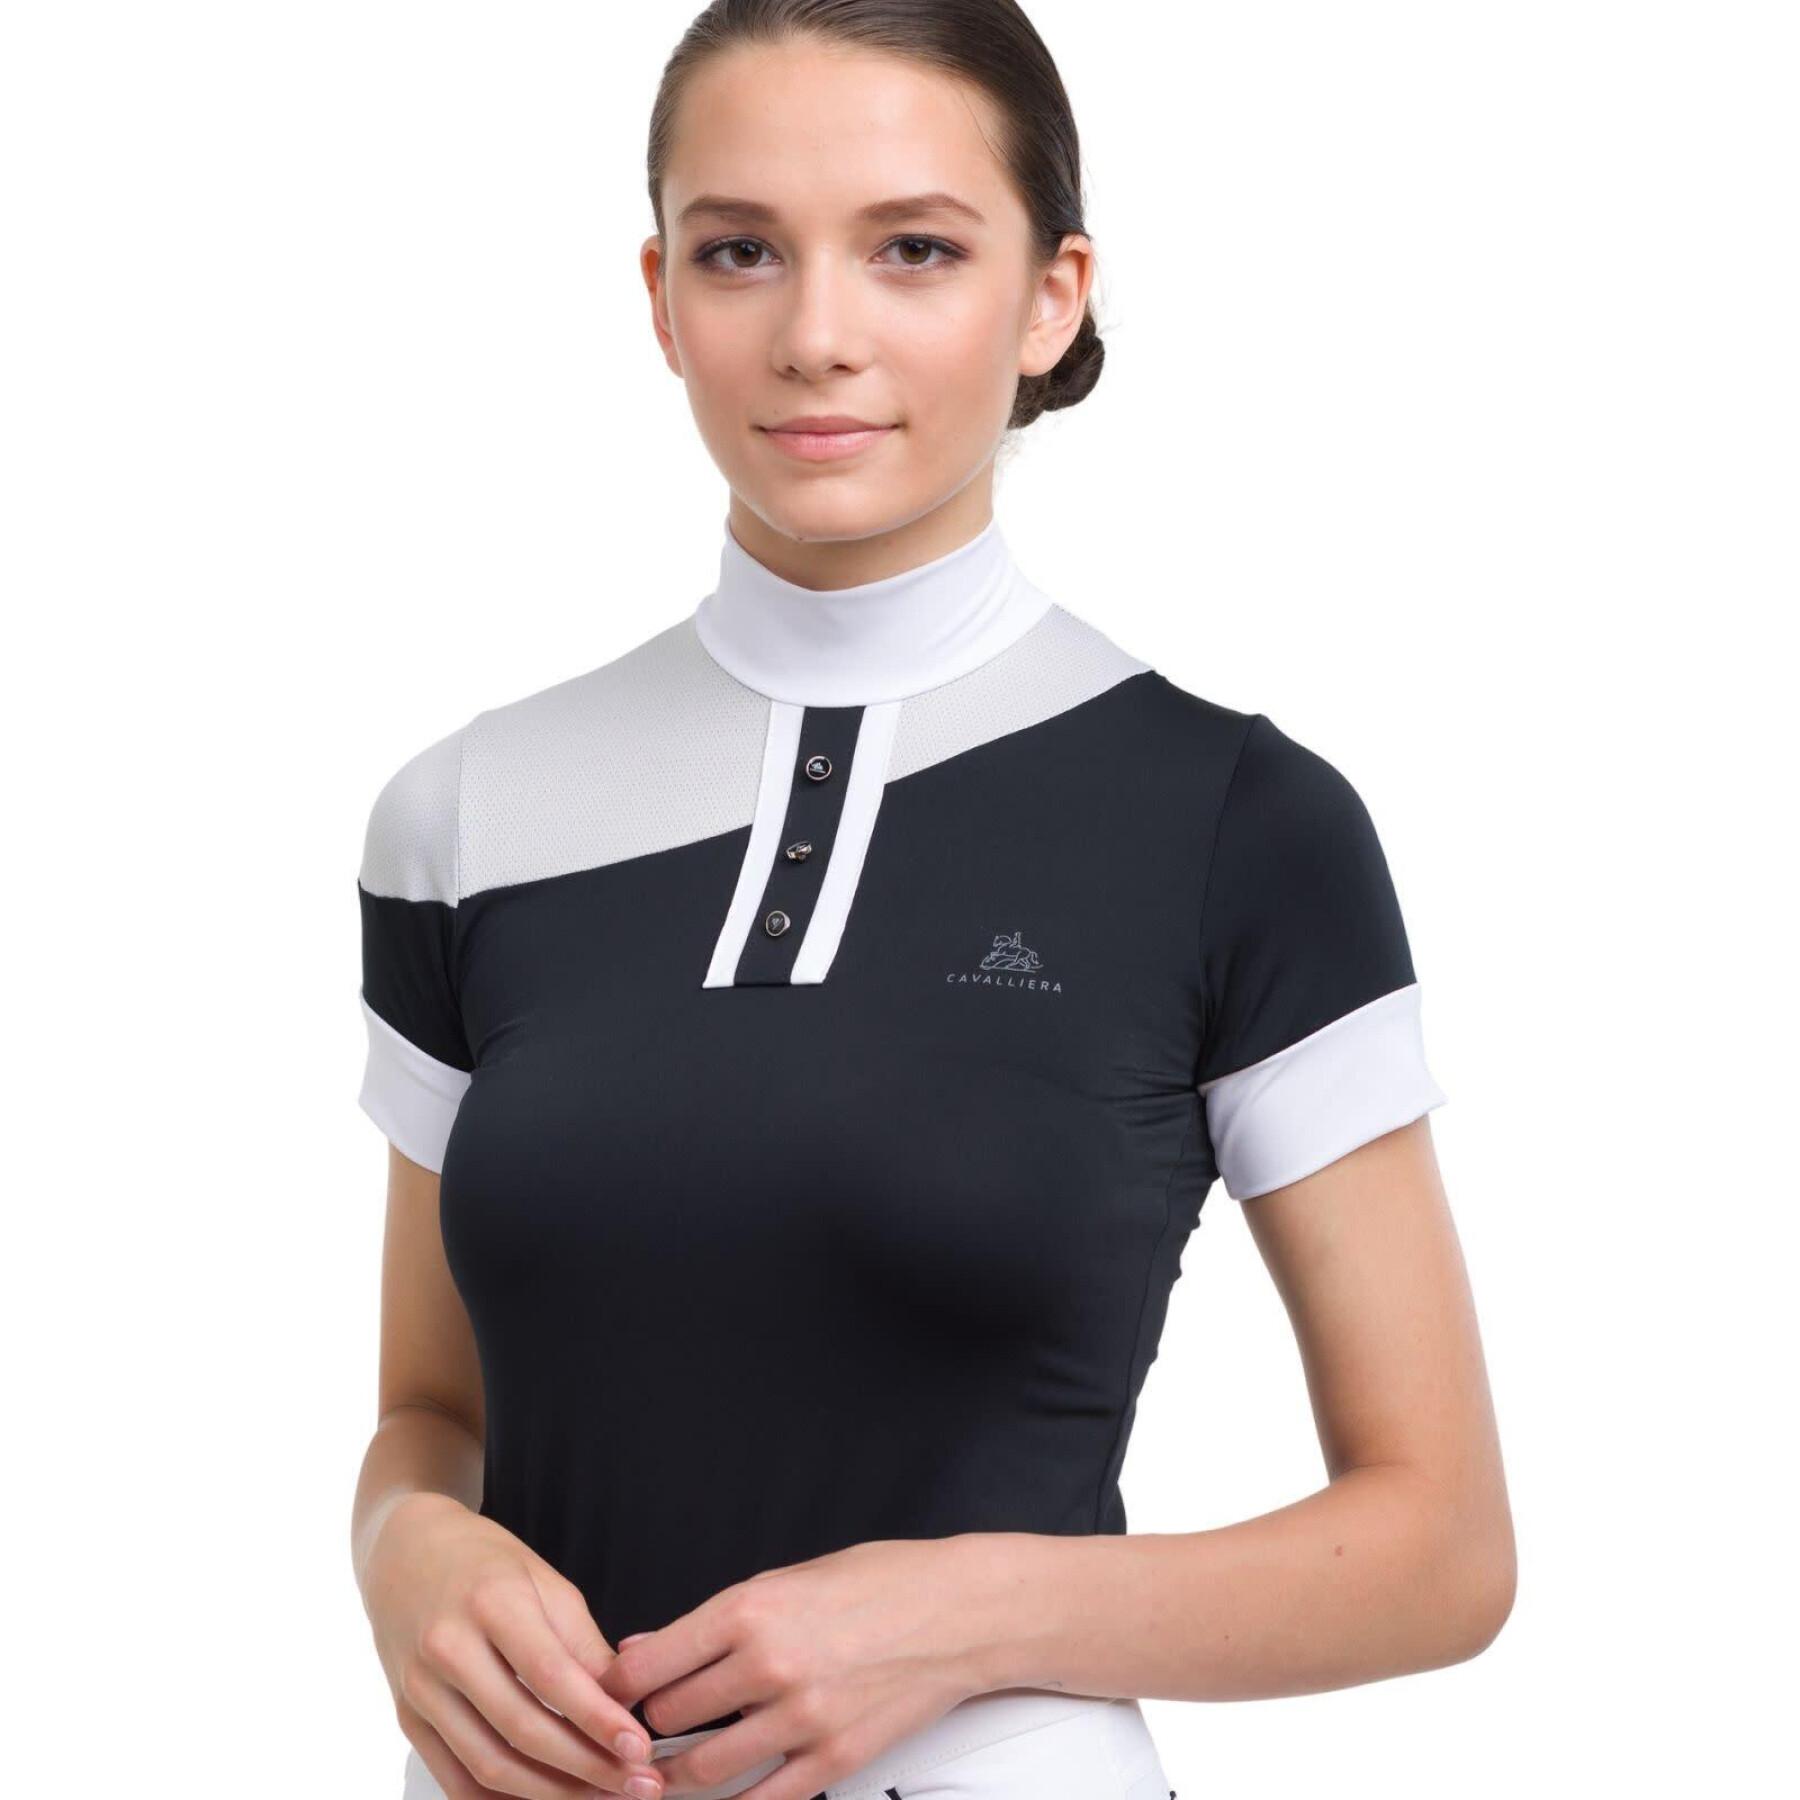 Women's competition polo shirt Cavalliera High Tech Oval